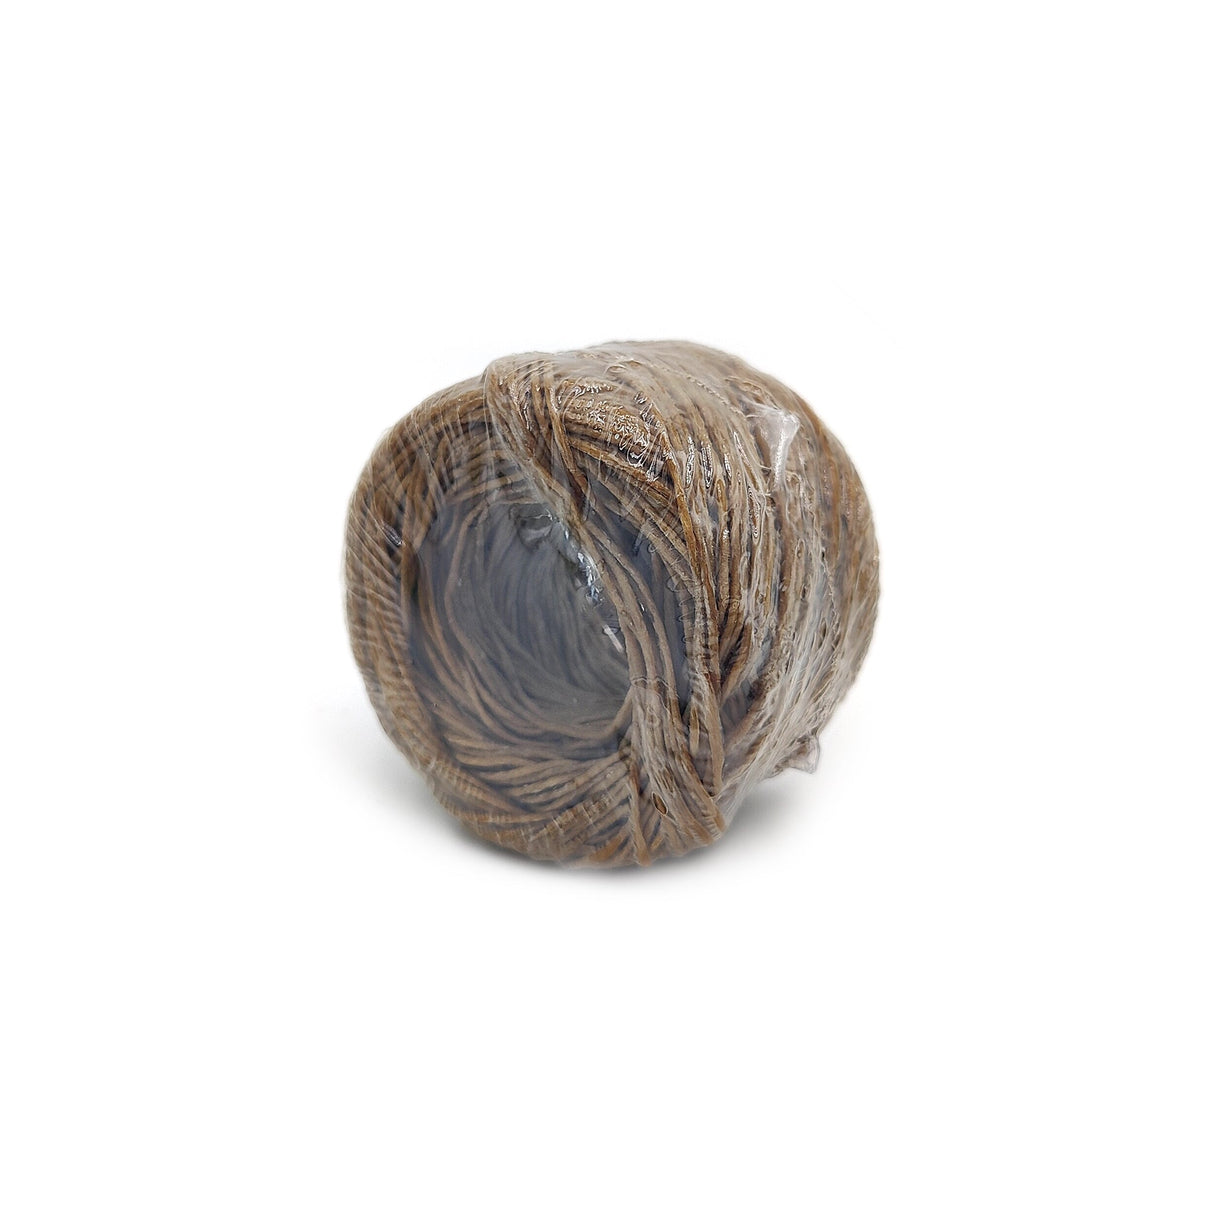 Primo All-Natural Organic Hemp Wick, 200ft Spool, Front View on White Background